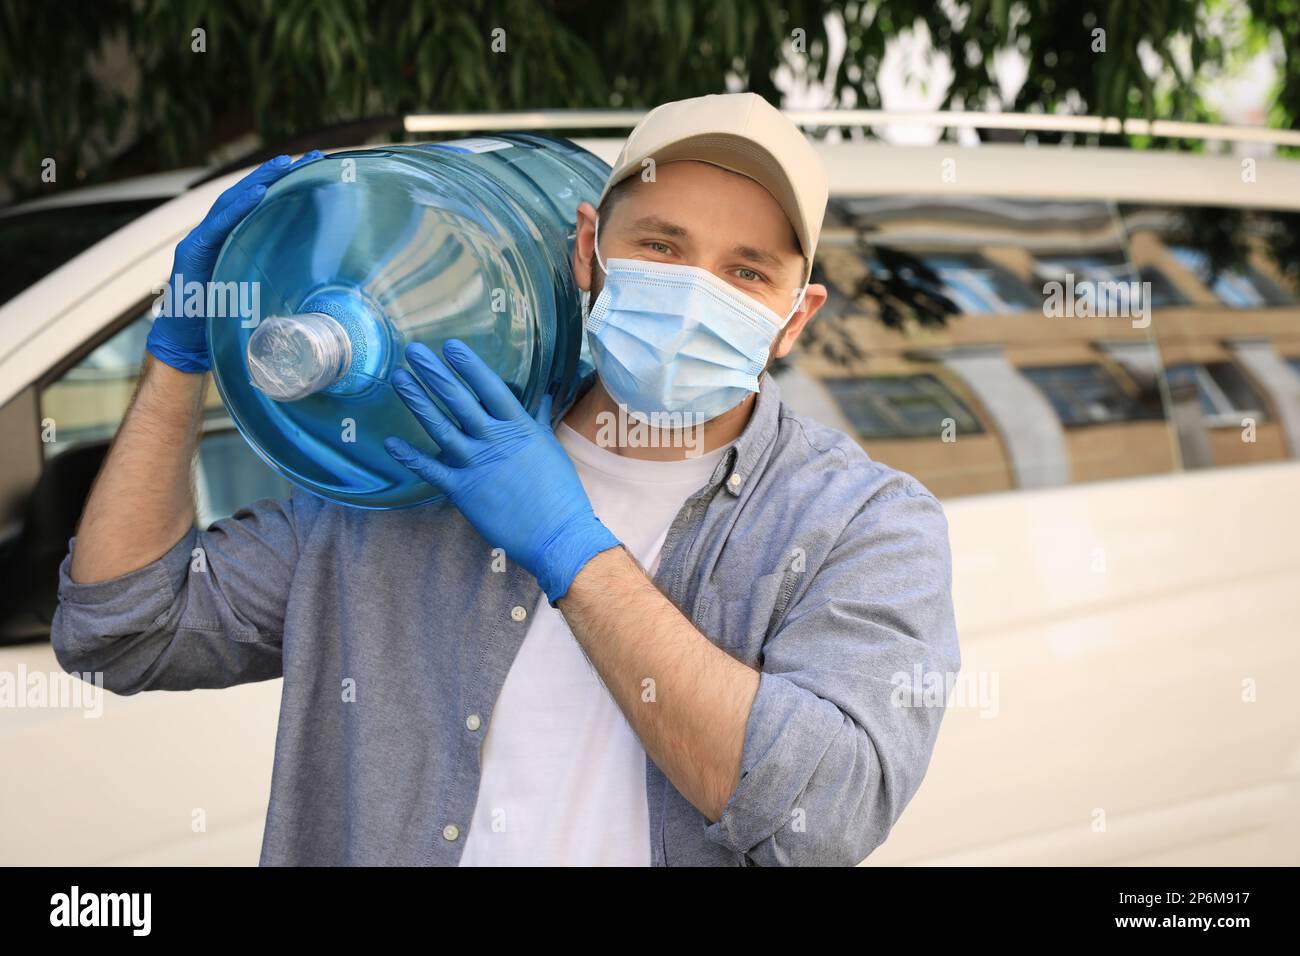 https://c8.alamy.com/comp/2P6M917/courier-in-medical-mask-holding-bottle-of-cooler-water-near-car-outdoors-delivery-during-coronavirus-quarantine-2P6M917.jpg